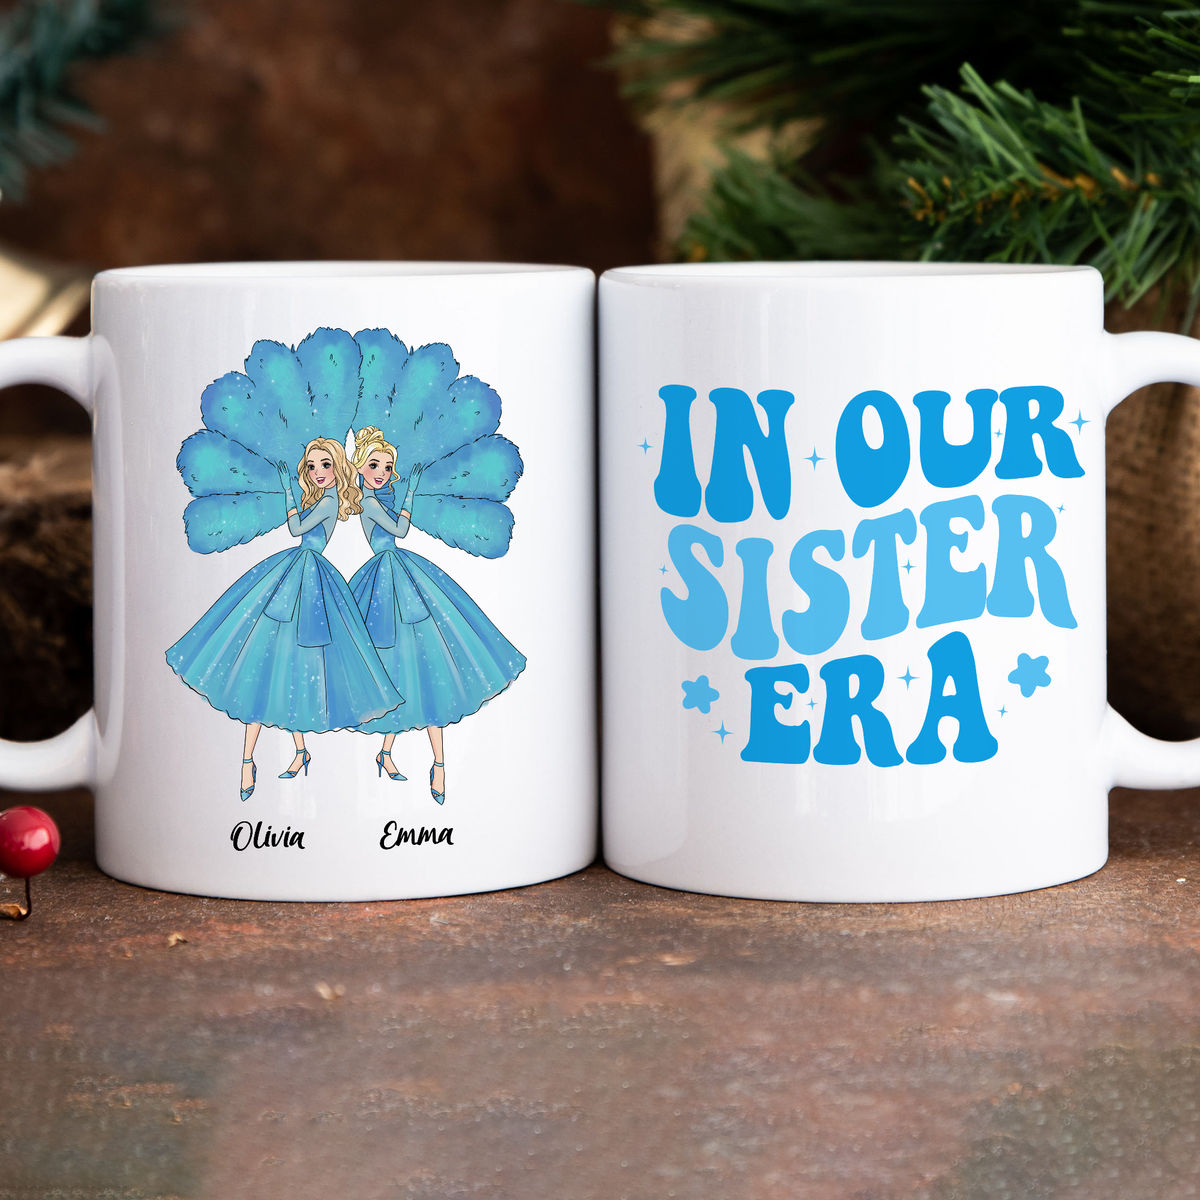 Personalized Mug - Personalized Mug For Sisters - Sisters Sisters - White Christmas - In our sister era_3